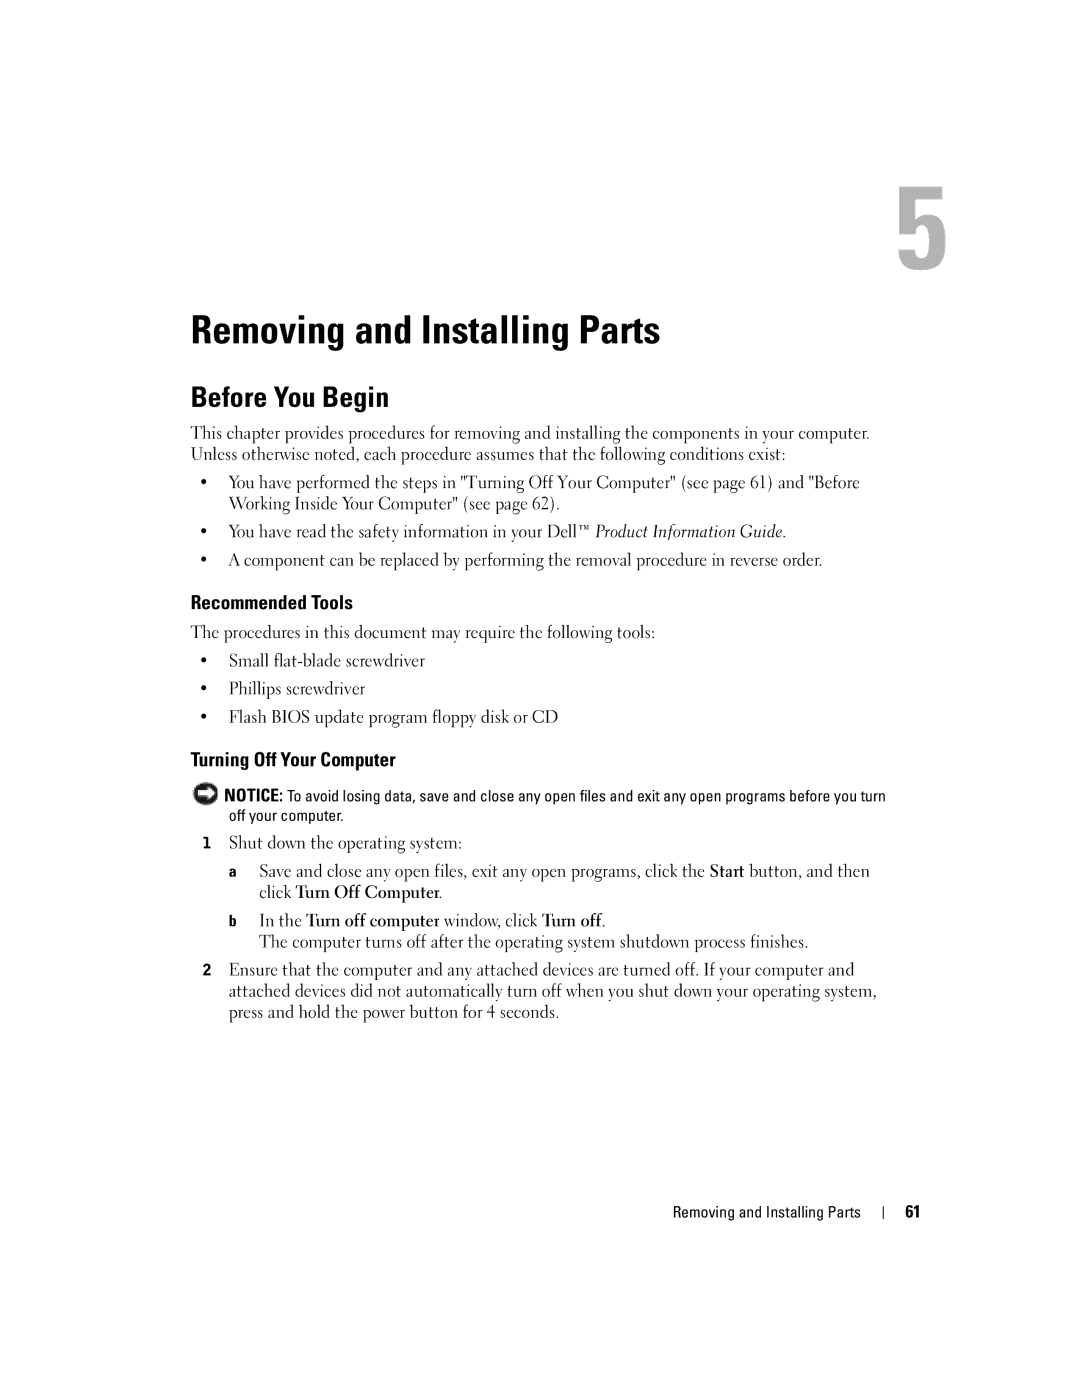 Dell XPS GEN 3 manual Before You Begin, Recommended Tools, Turning Off Your Computer, Removing and Installing Parts 